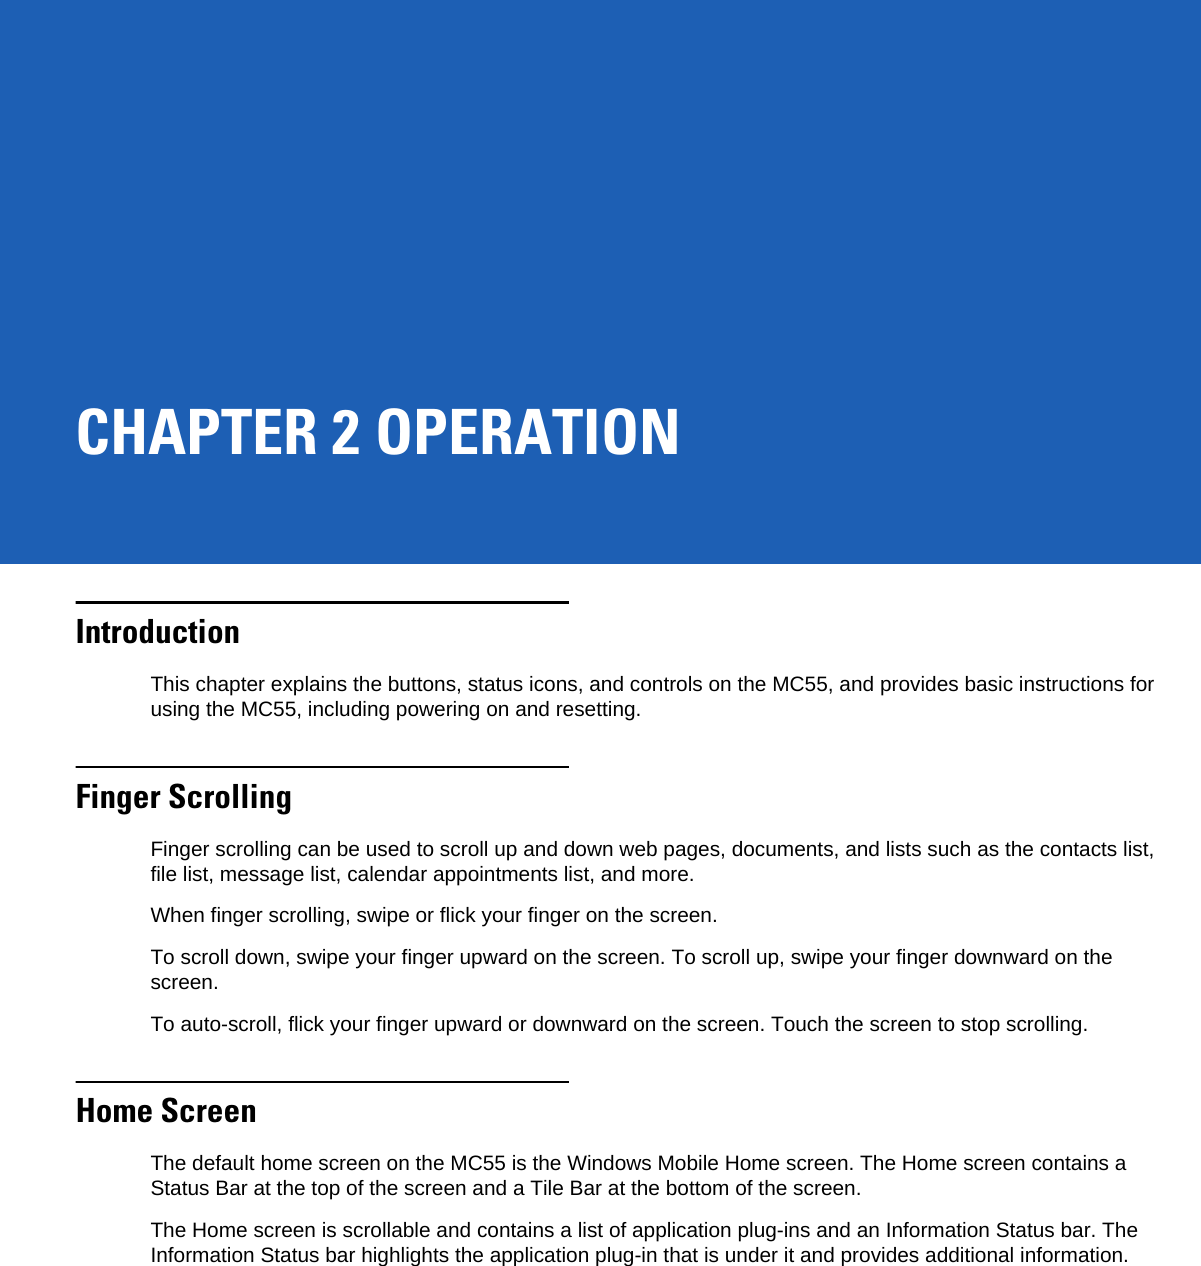 CHAPTER 2 OPERATIONIntroductionThis chapter explains the buttons, status icons, and controls on the MC55, and provides basic instructions for using the MC55, including powering on and resetting.Finger ScrollingFinger scrolling can be used to scroll up and down web pages, documents, and lists such as the contacts list, file list, message list, calendar appointments list, and more.When finger scrolling, swipe or flick your finger on the screen.To scroll down, swipe your finger upward on the screen. To scroll up, swipe your finger downward on the screen.To auto-scroll, flick your finger upward or downward on the screen. Touch the screen to stop scrolling.Home ScreenThe default home screen on the MC55 is the Windows Mobile Home screen. The Home screen contains a Status Bar at the top of the screen and a Tile Bar at the bottom of the screen.The Home screen is scrollable and contains a list of application plug-ins and an Information Status bar. The Information Status bar highlights the application plug-in that is under it and provides additional information.